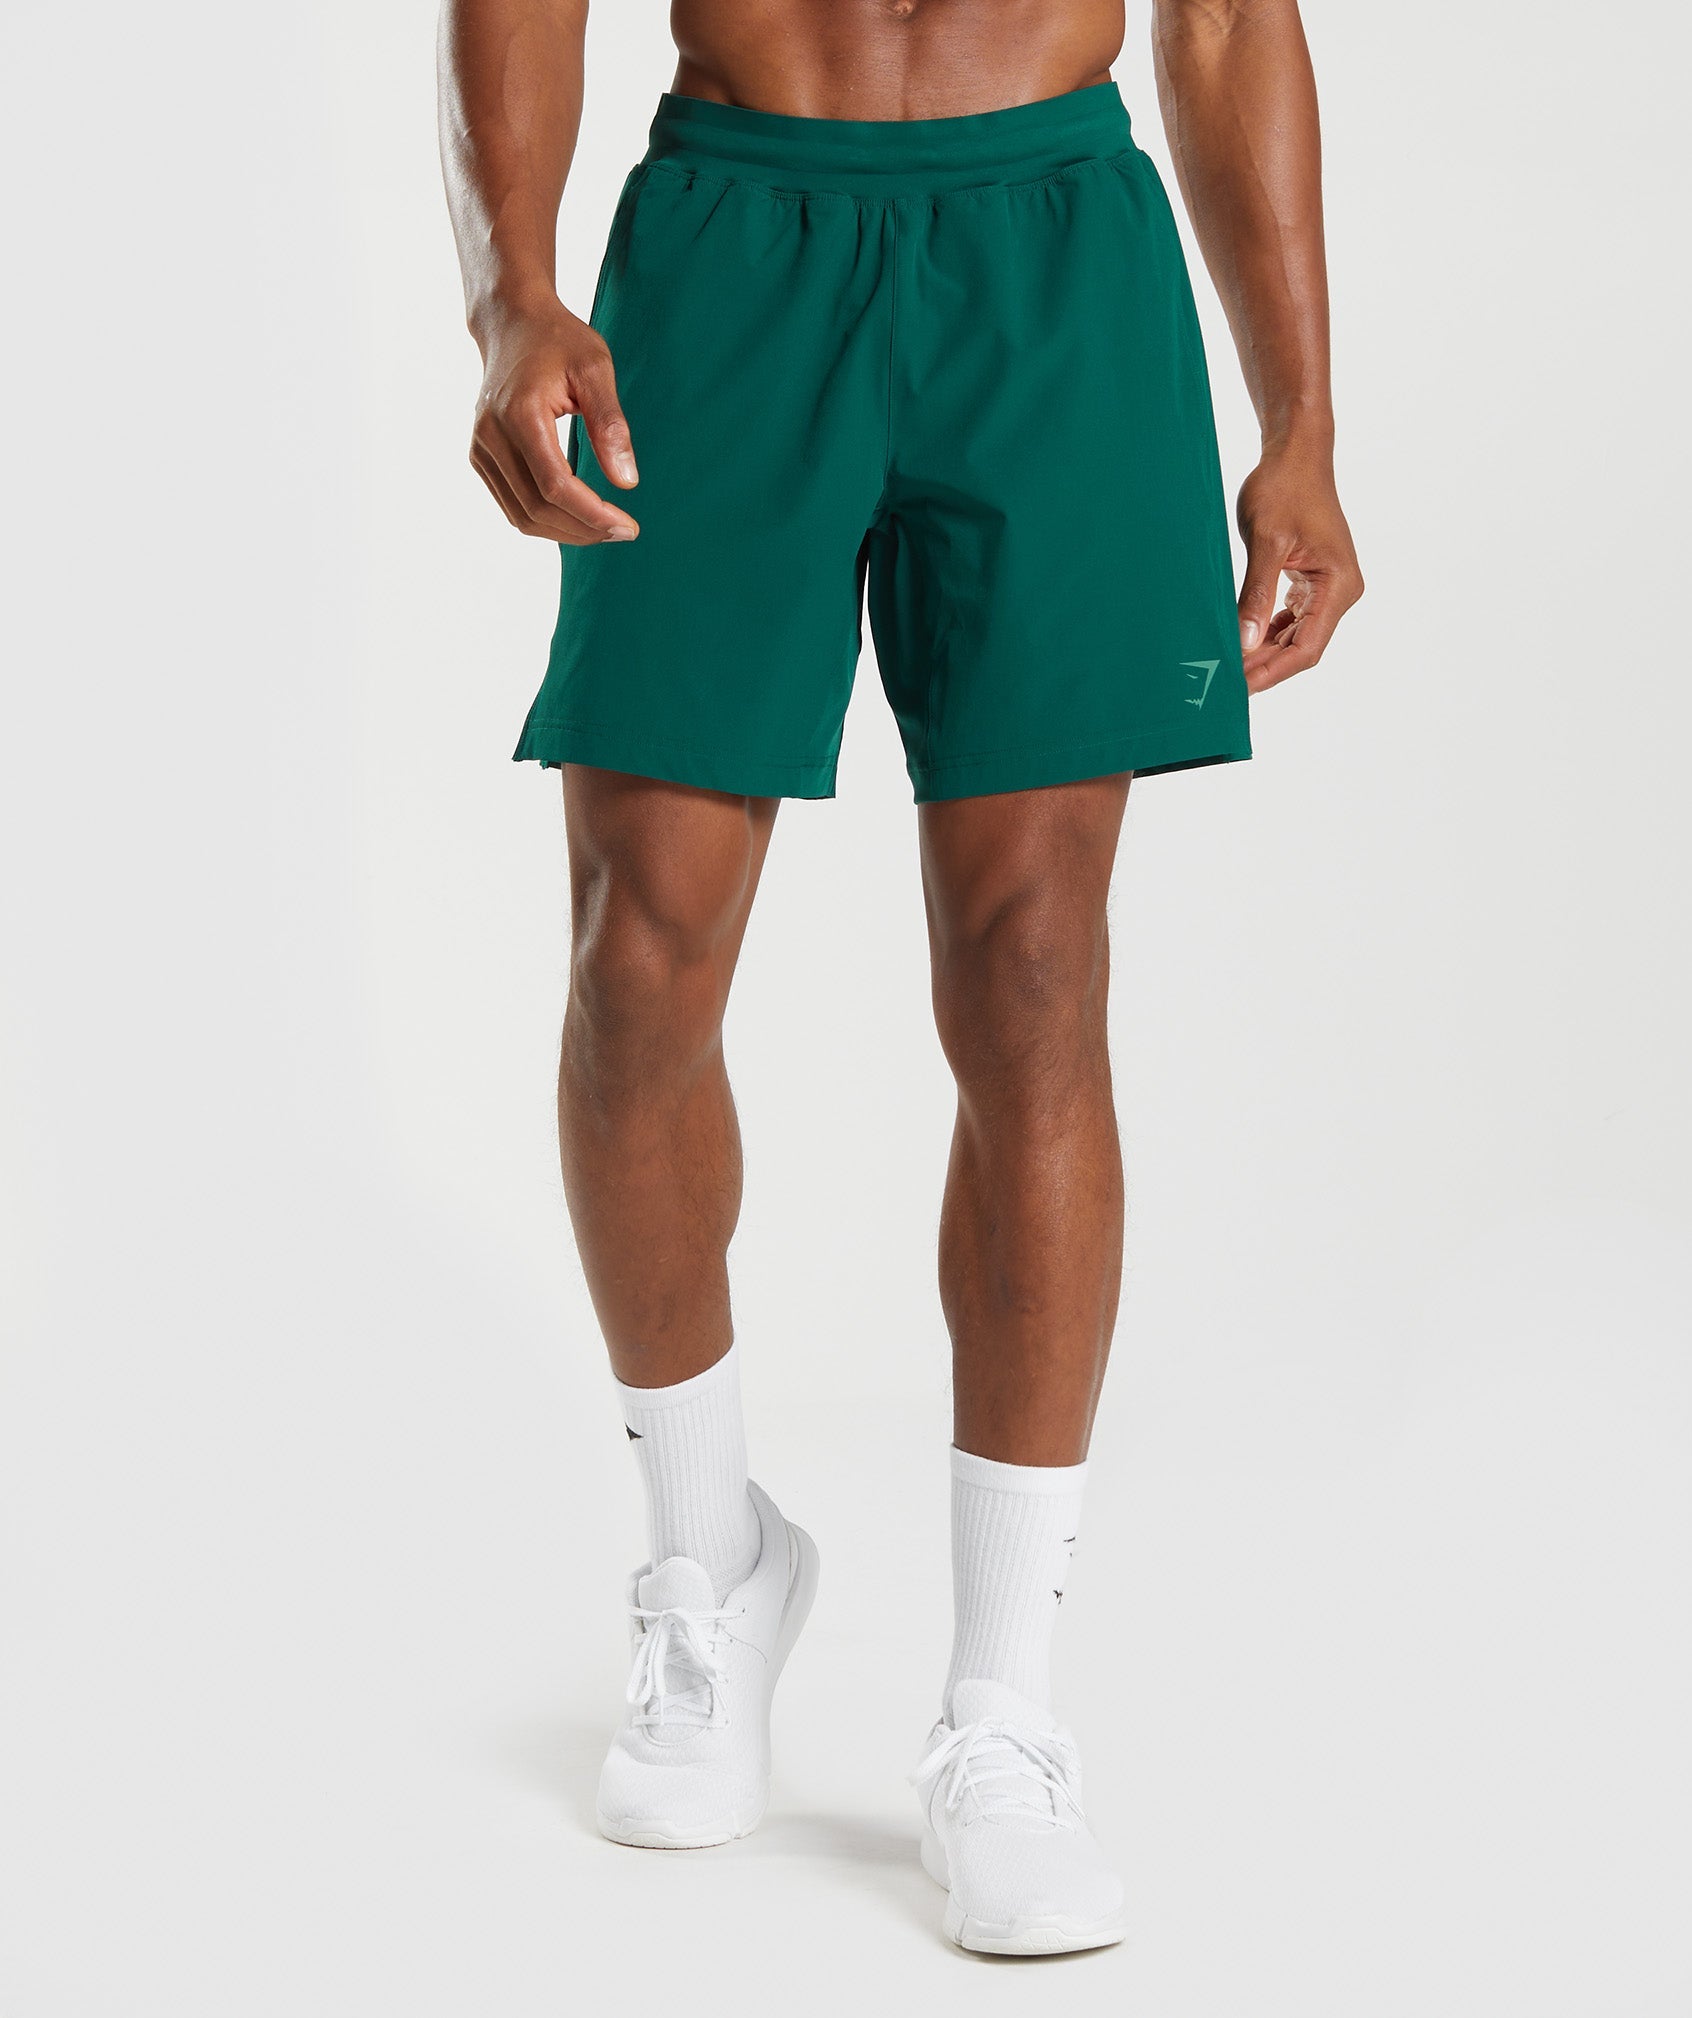 Apex 8" Function Shorts in Woodland Green - view 1